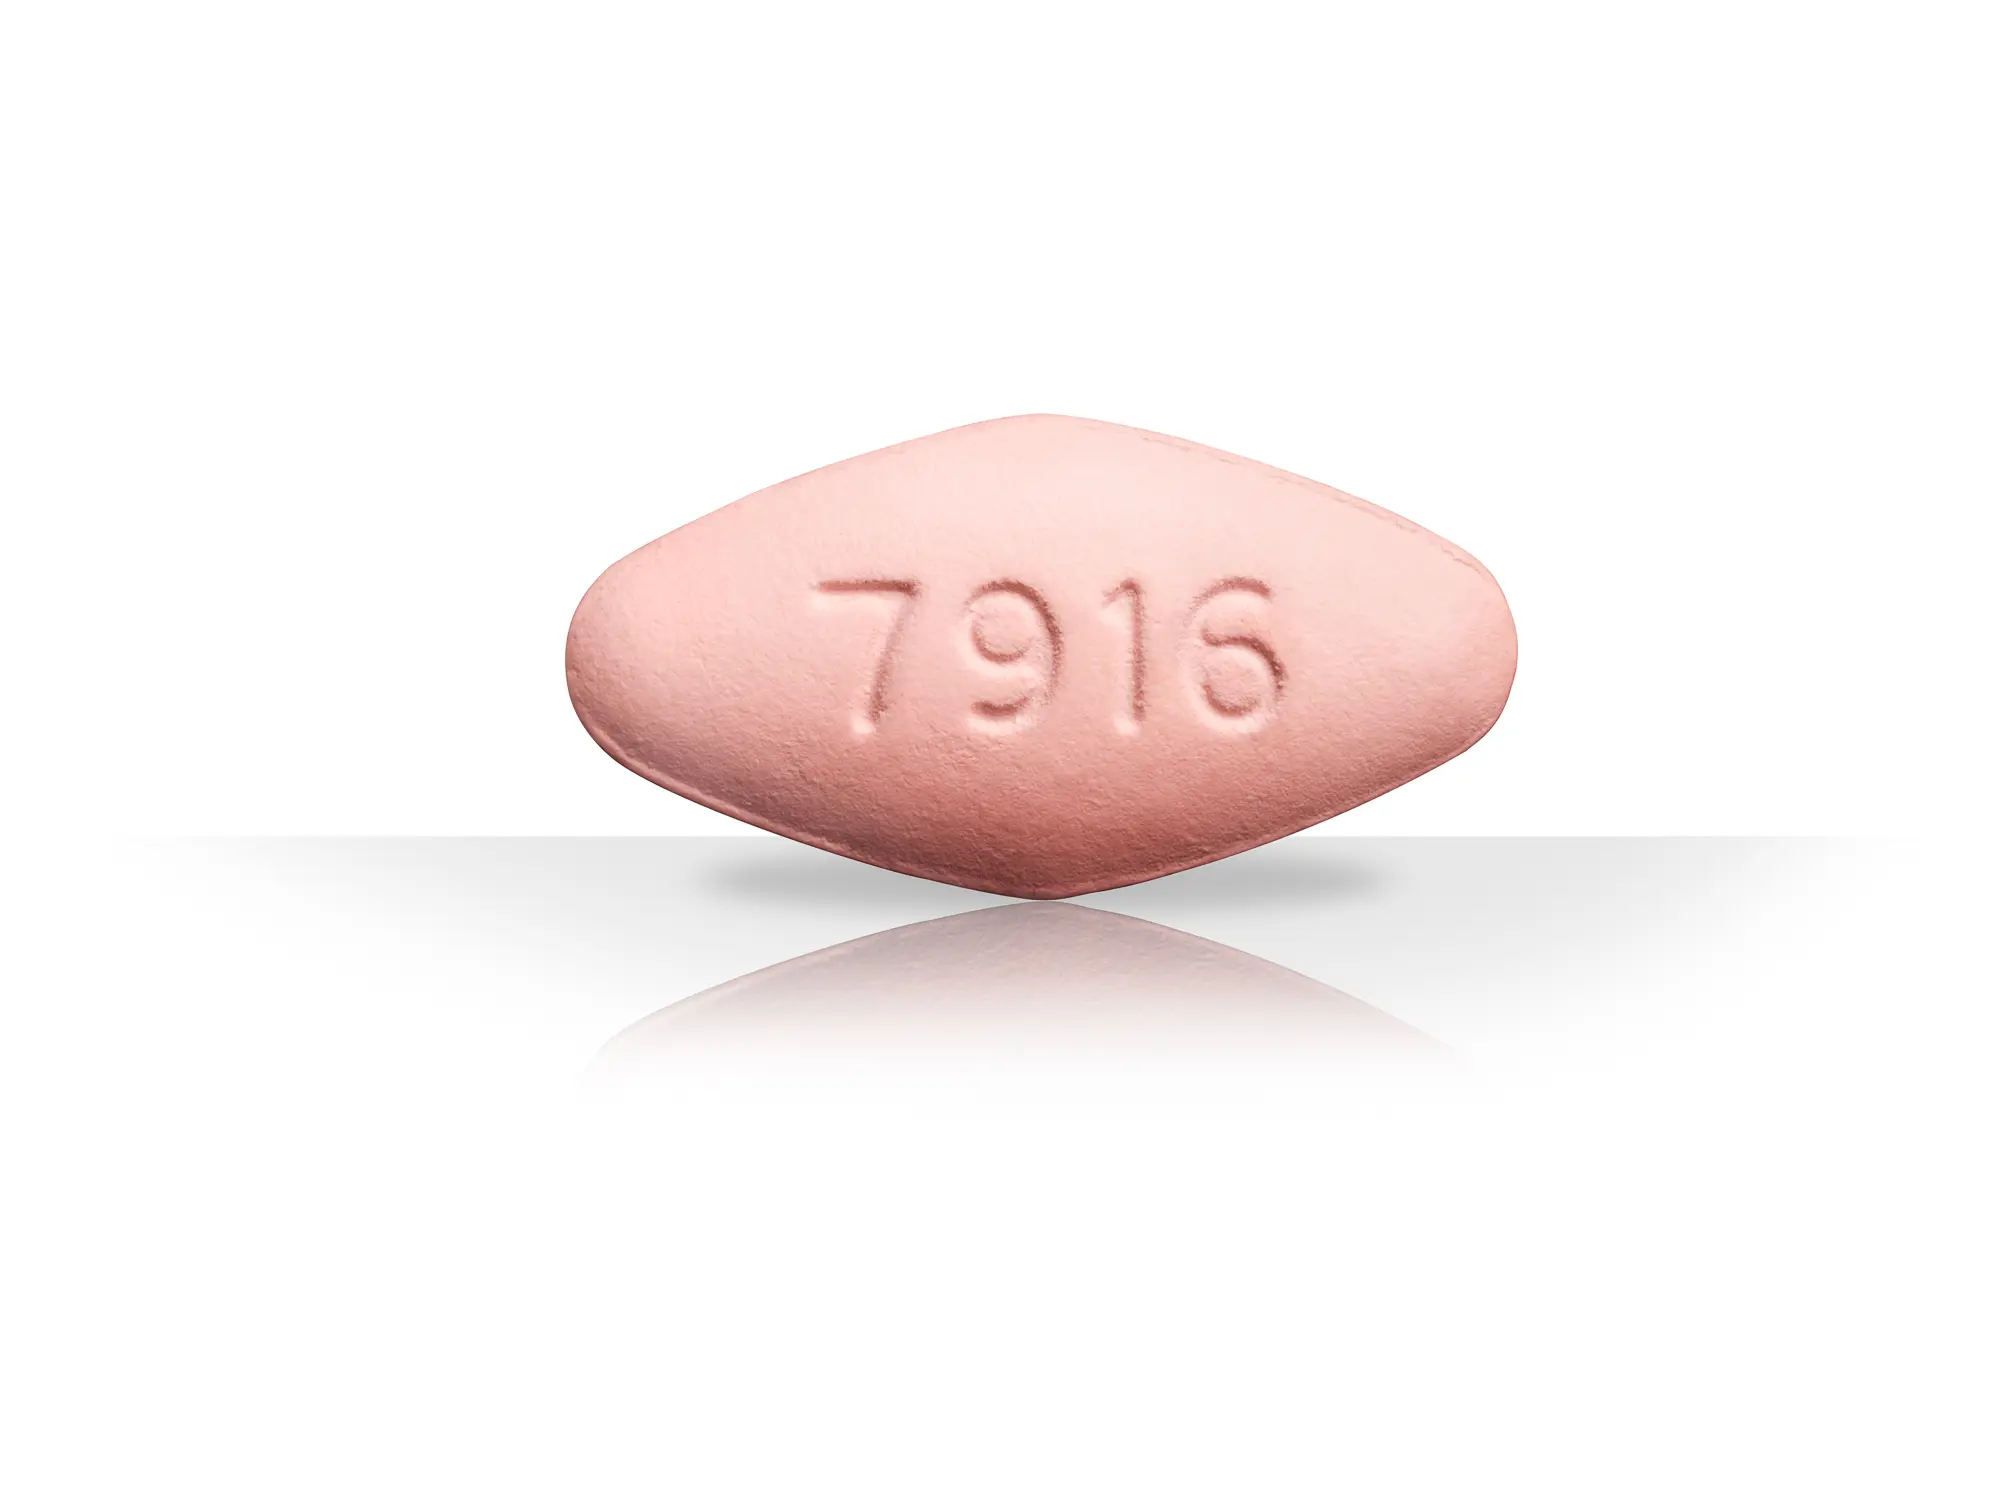 Photograph of new medicine tablet.